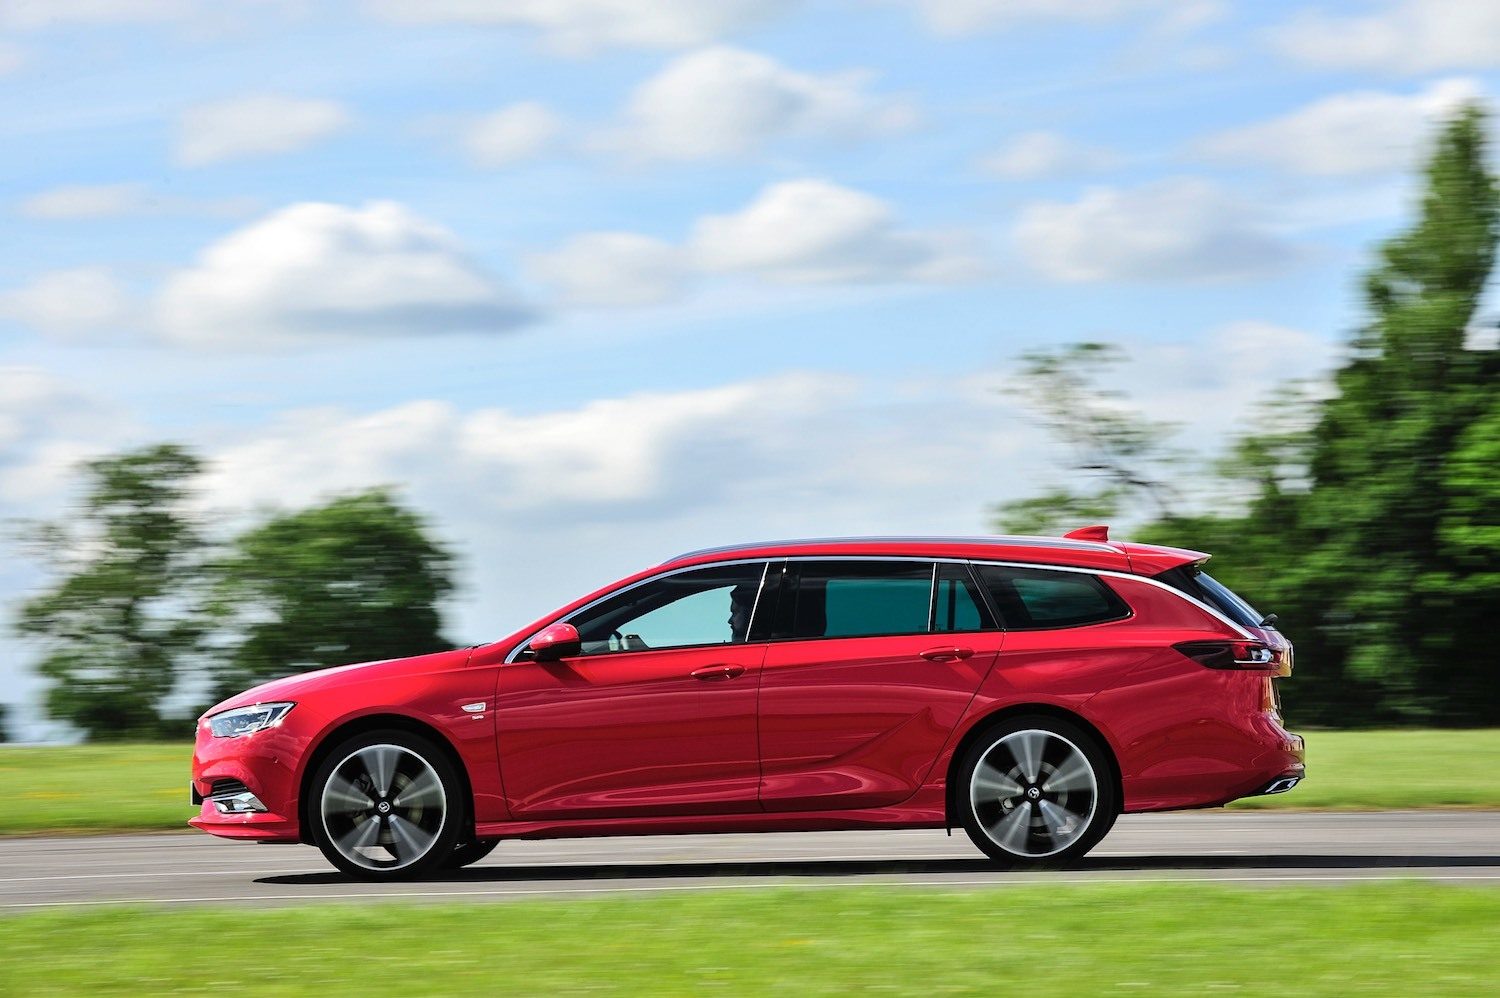 drive-Tom Scanlan Reviews the New Vauxhall Insignia Sports Tourer 6